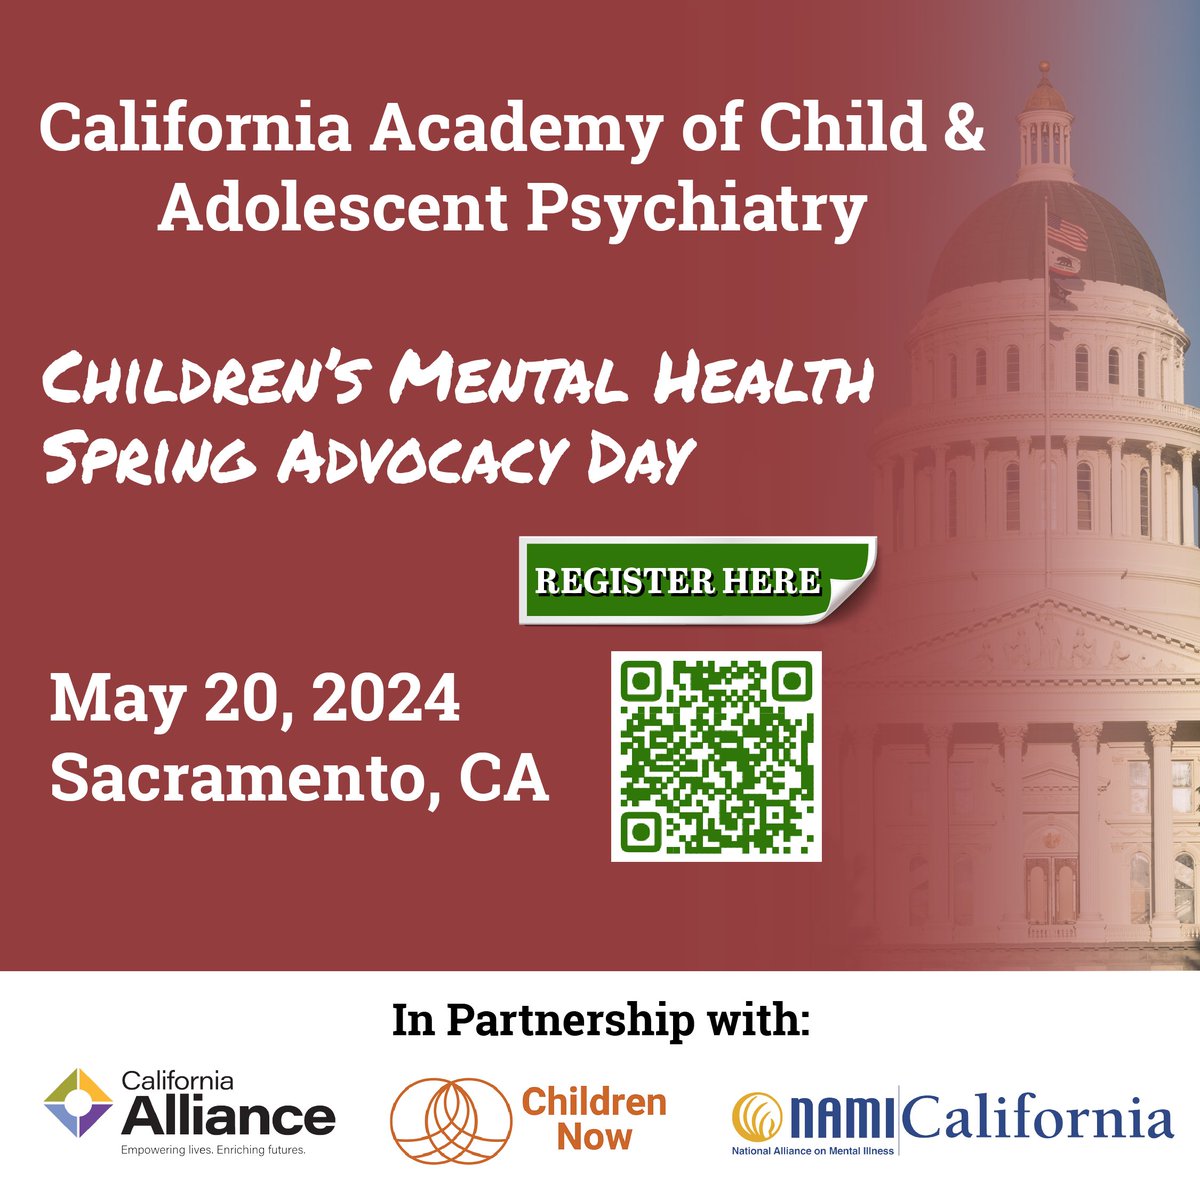 Join us for the 2024 Children’s Mental Health Spring Advocacy Day on May 20th in Sacramento! Meet with legislators, advocate for issues, and network with others. Register at bit.ly/SpringAdvcy24a… share! #ChildrensMentalHealth #CALACAP #ChildrenNow #NAMICA #CaliforniaAlliance